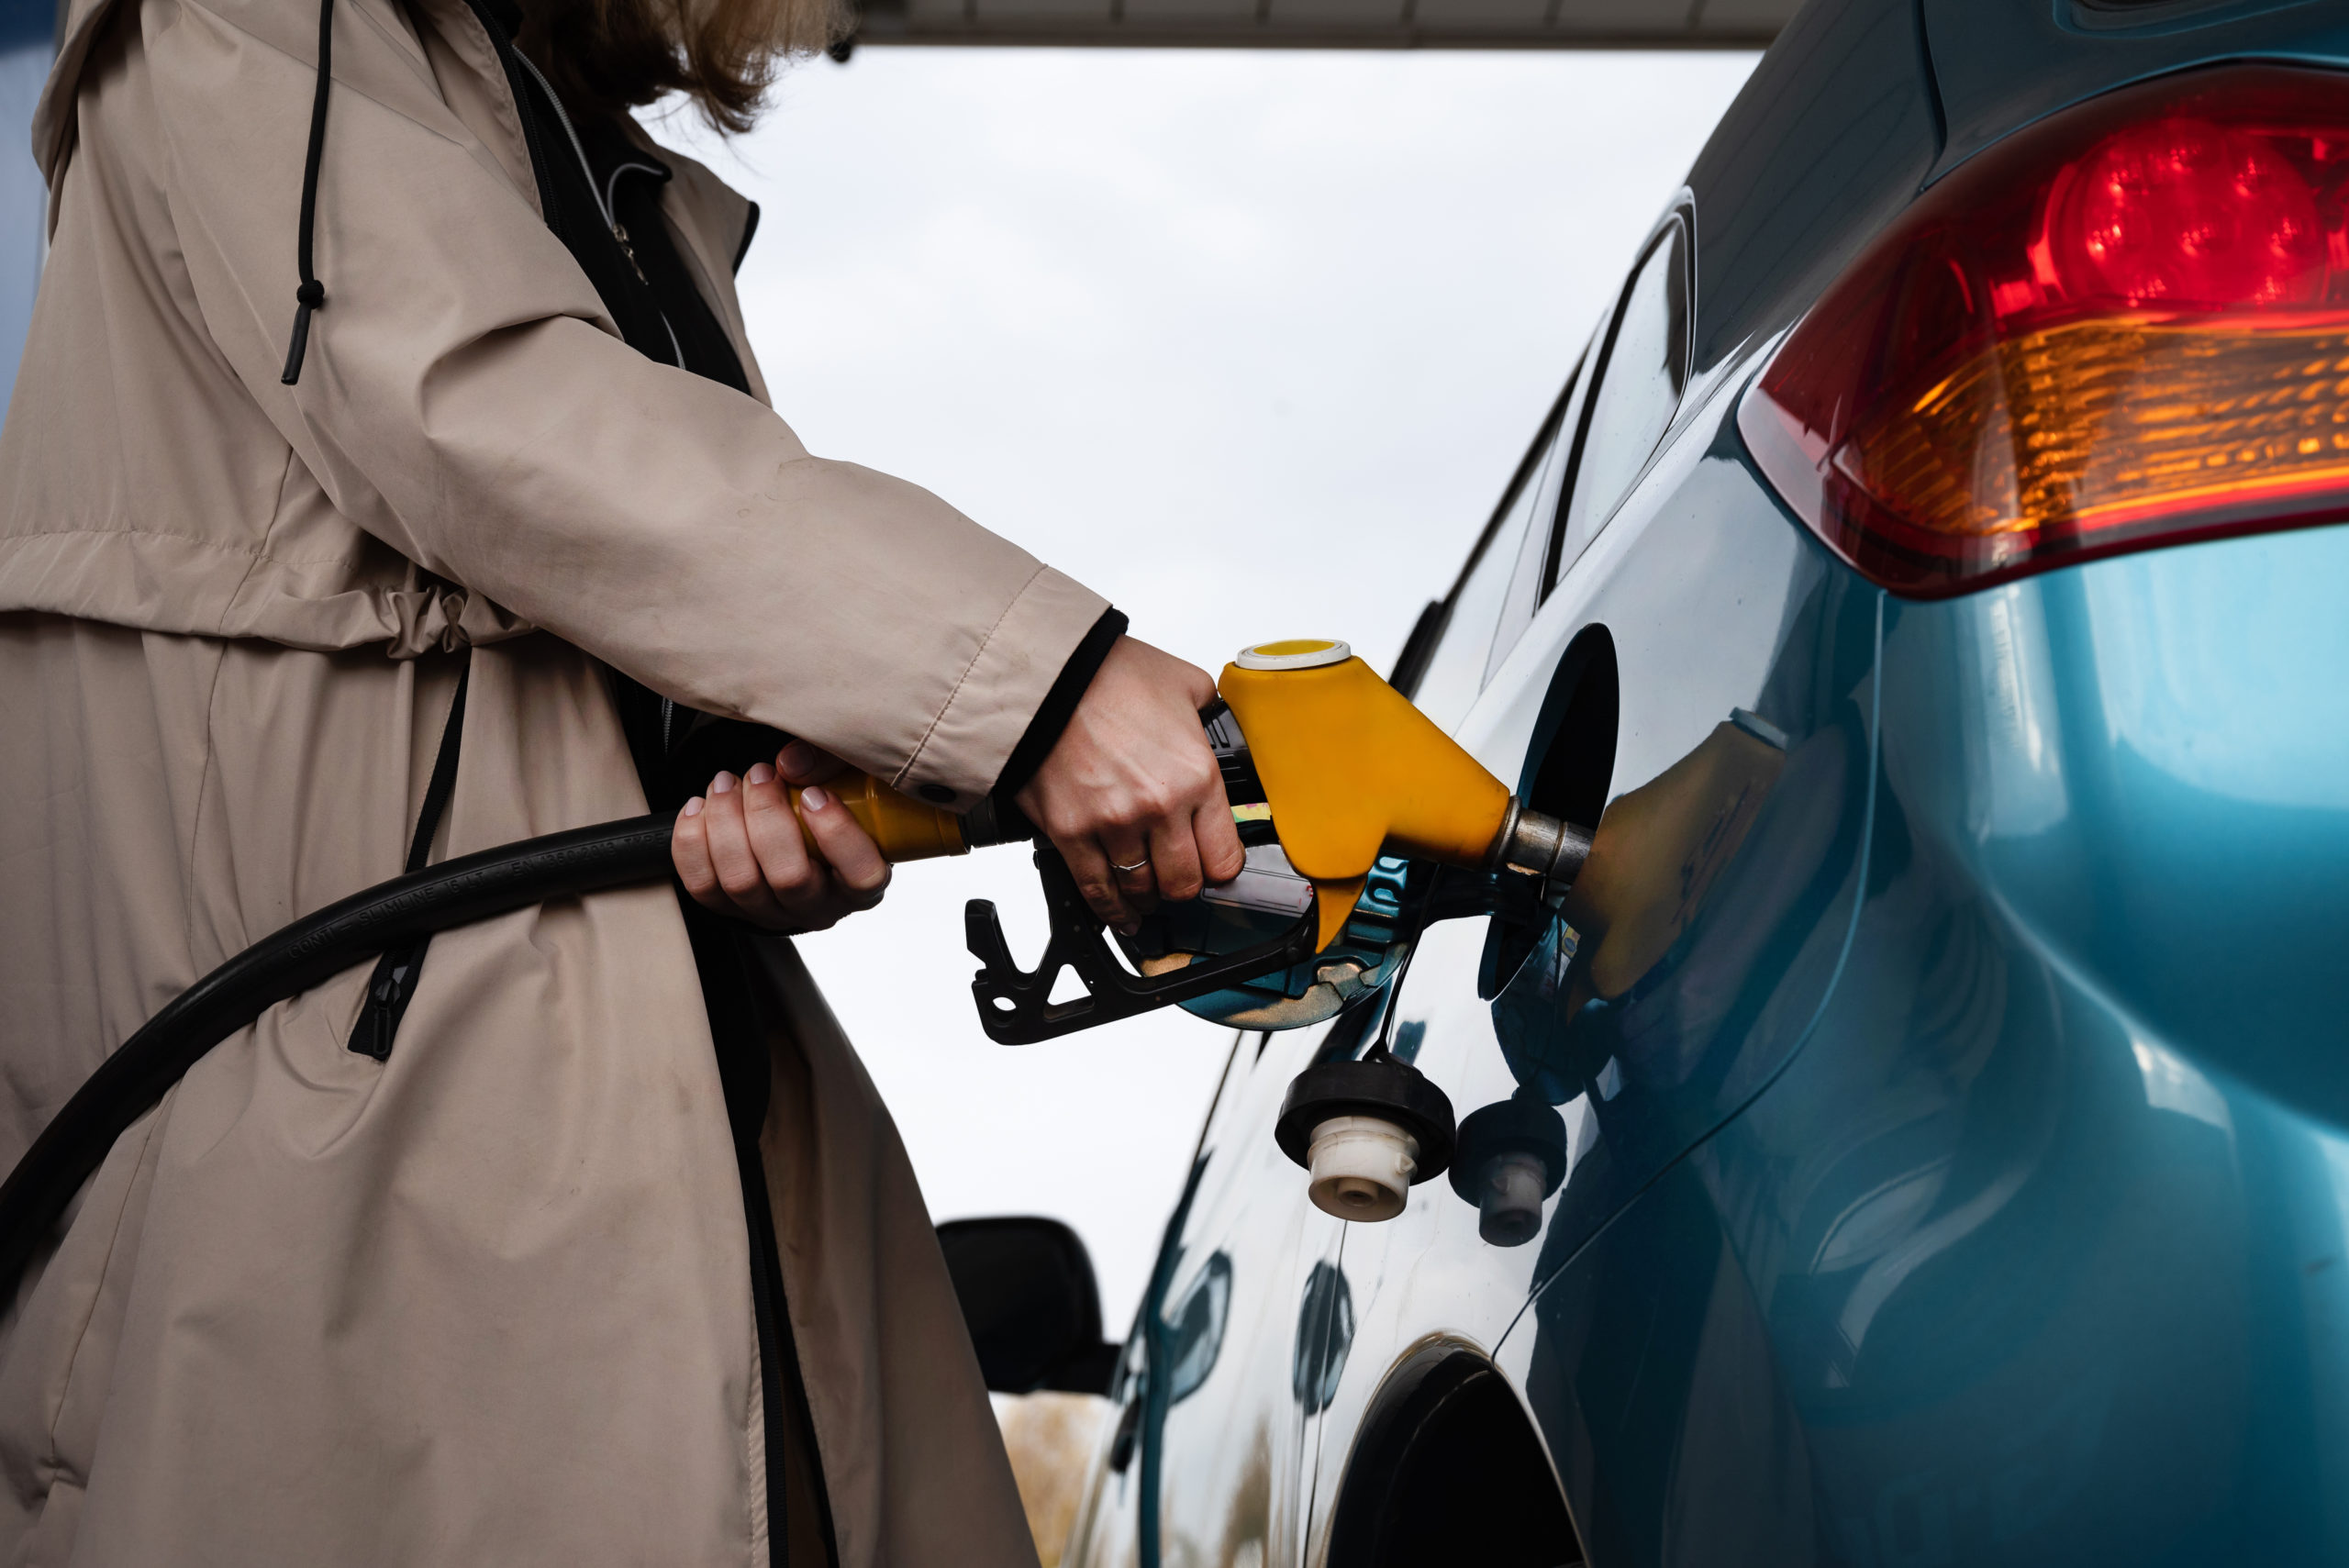 https://autolab.com.co/wp-content/uploads/pumping-gas-at-the-gas-pump-the-woman-refuels-the-2024-01-15-19-43-16-utc-scaled.jpg